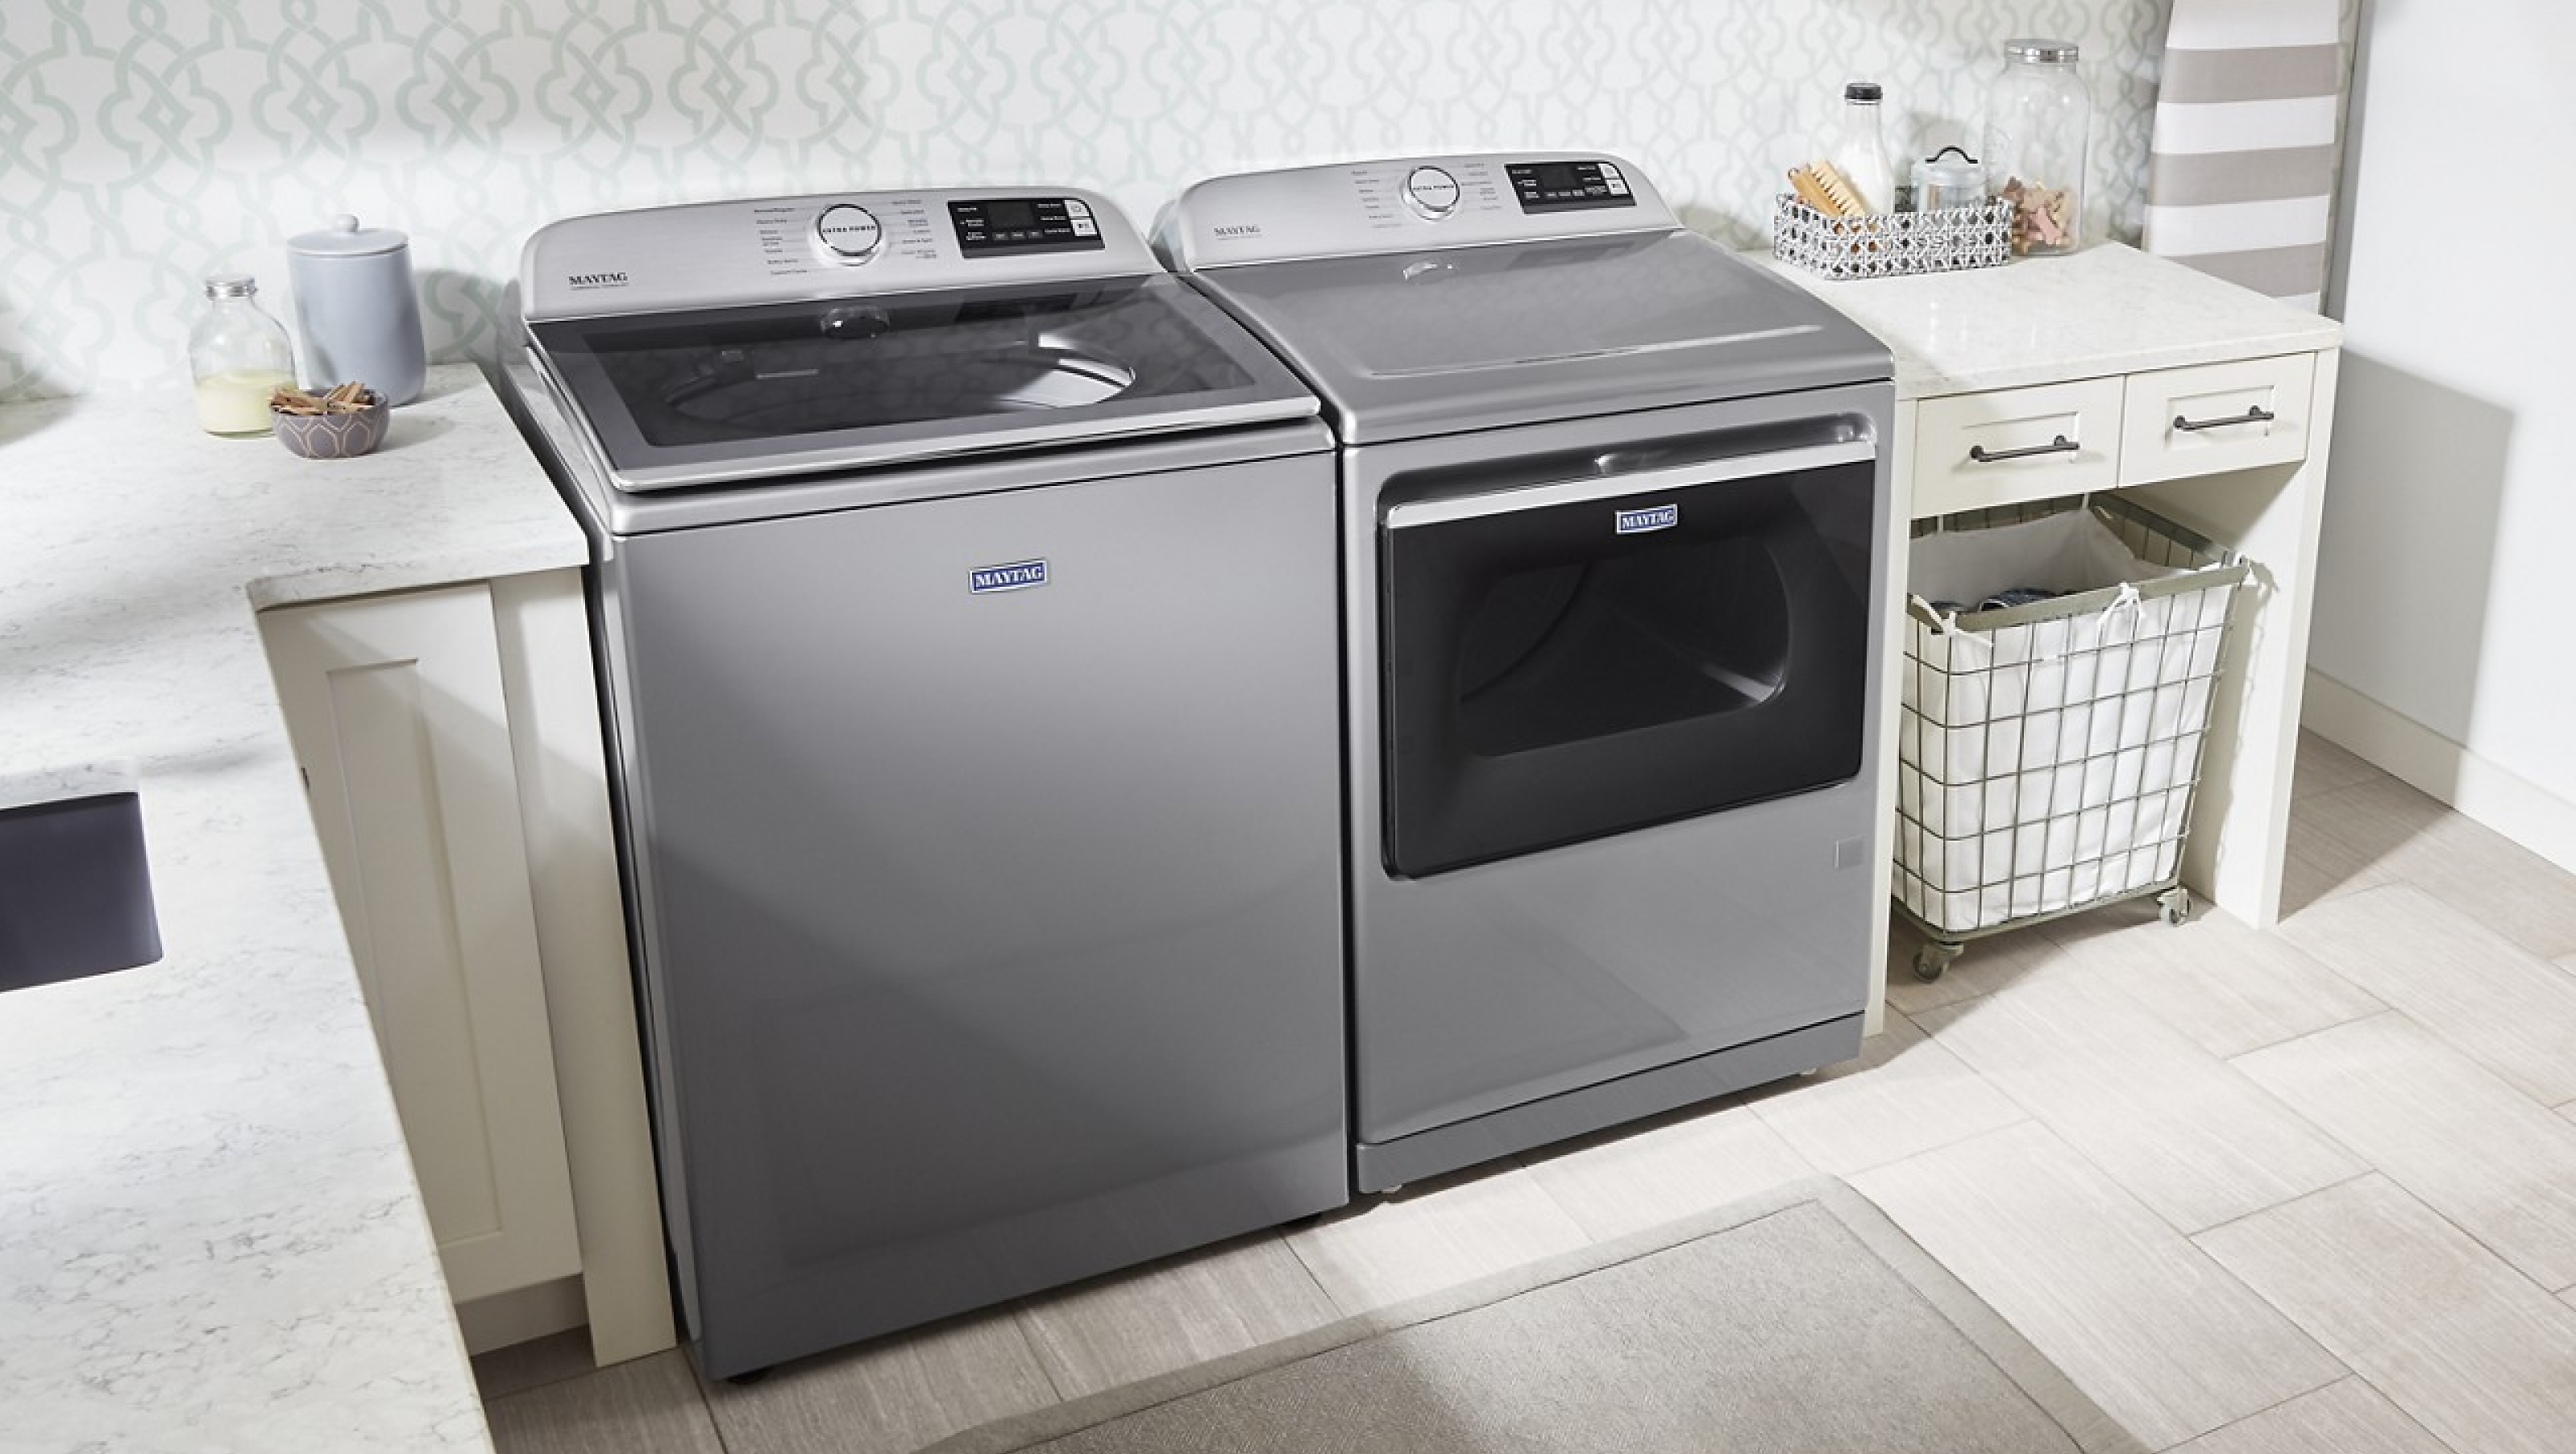 Maytag® top load washer and dryer in a laundry room